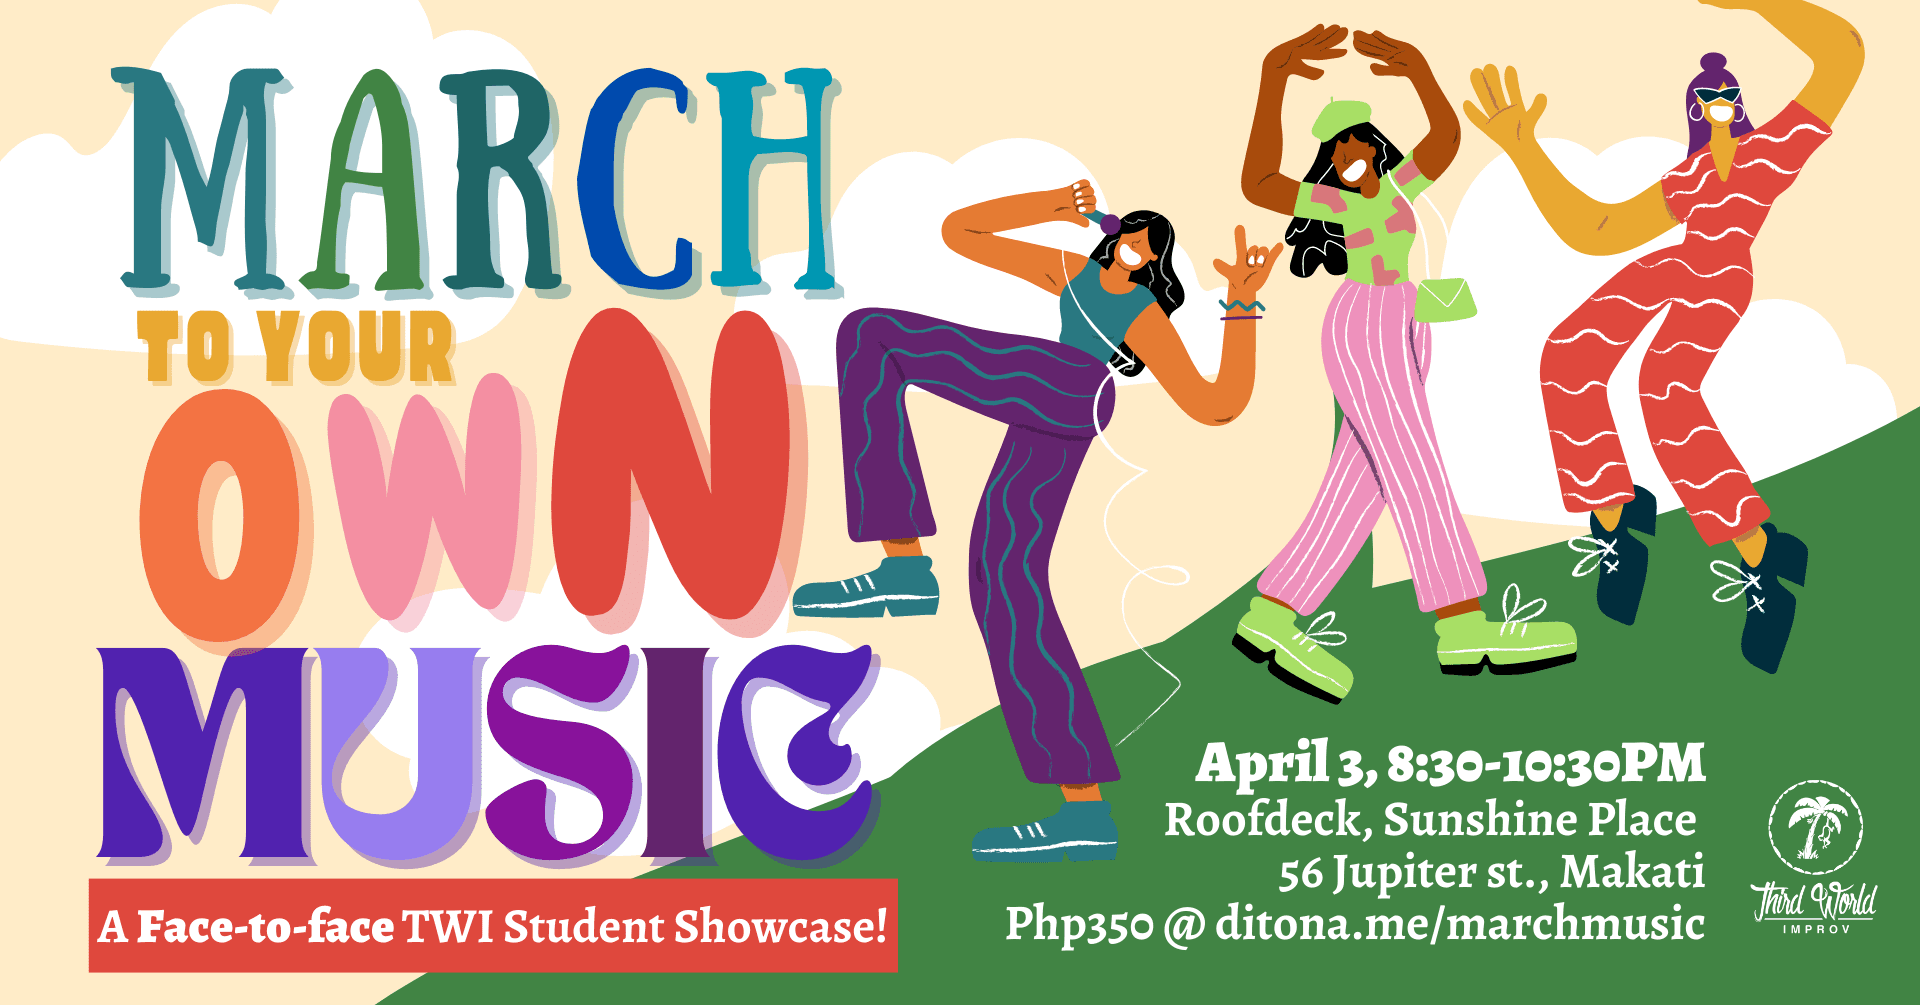 March To Your Own Music: A Face-to-Face TWI Student Showcase Poster